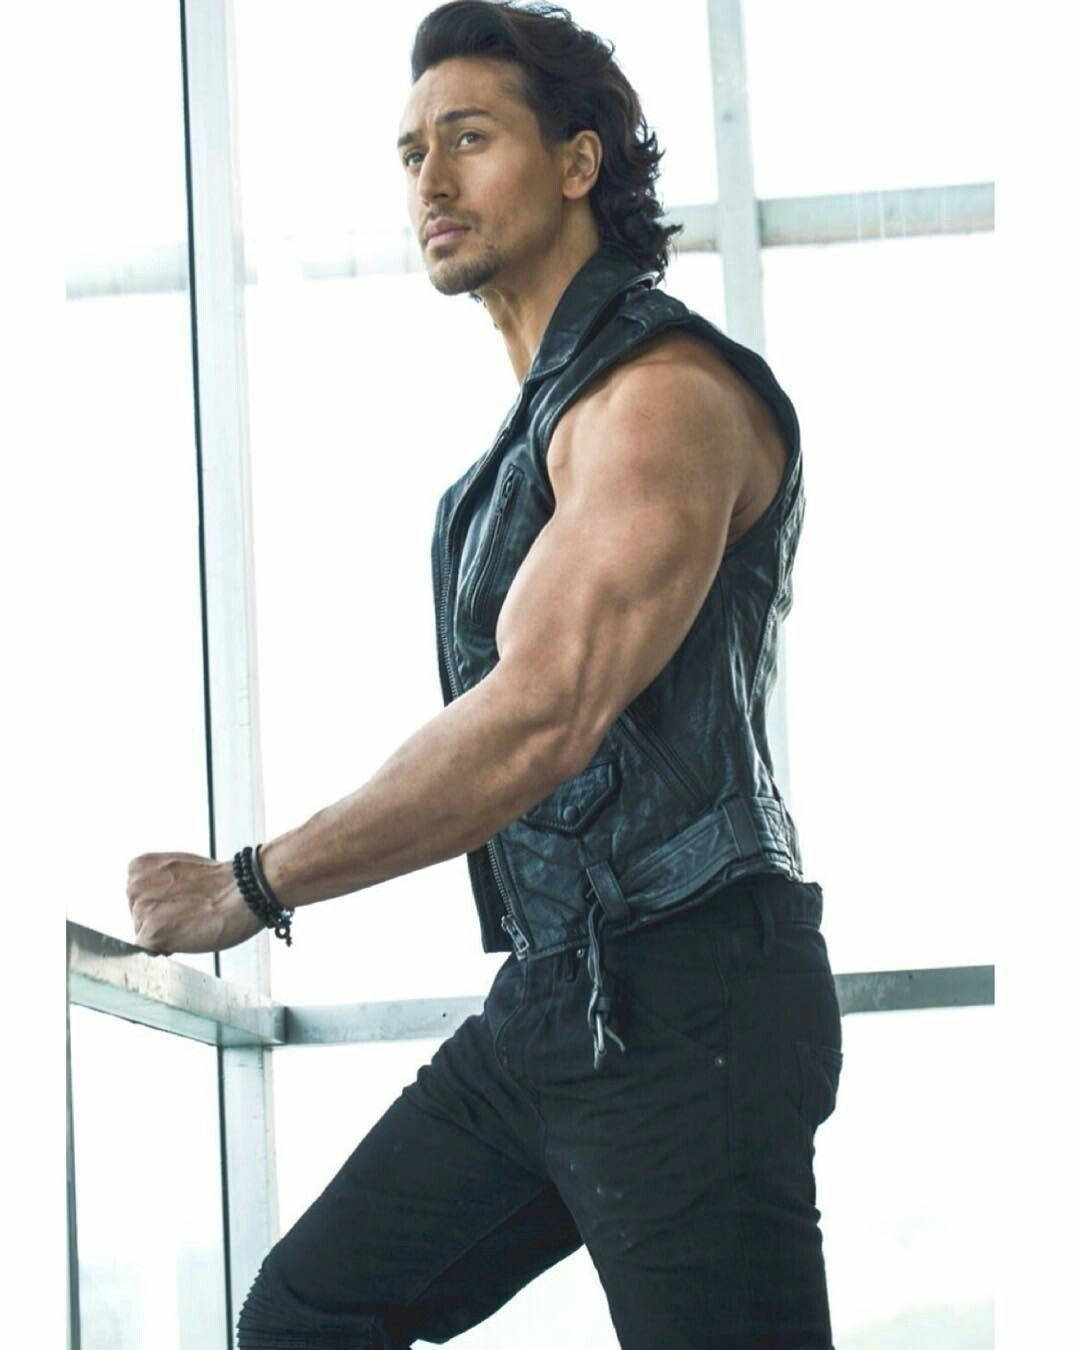 Tiger Shroff Body With Leather Vest Wallpaper